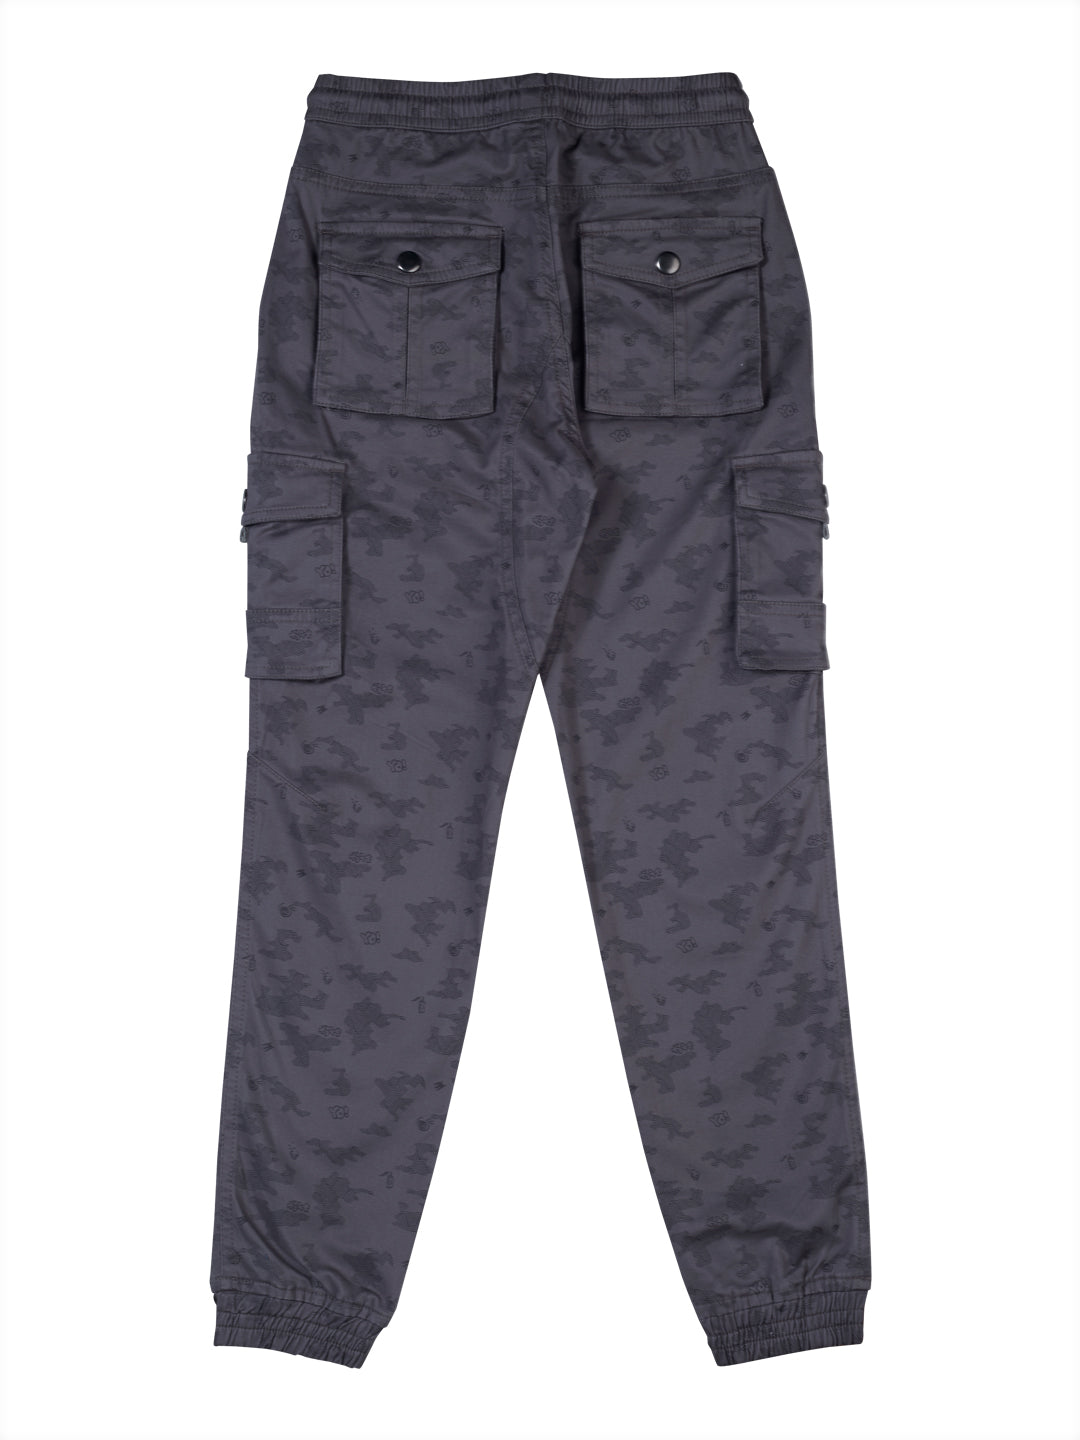 Boys Grey Cotton Solid Fixed Waist Trouser